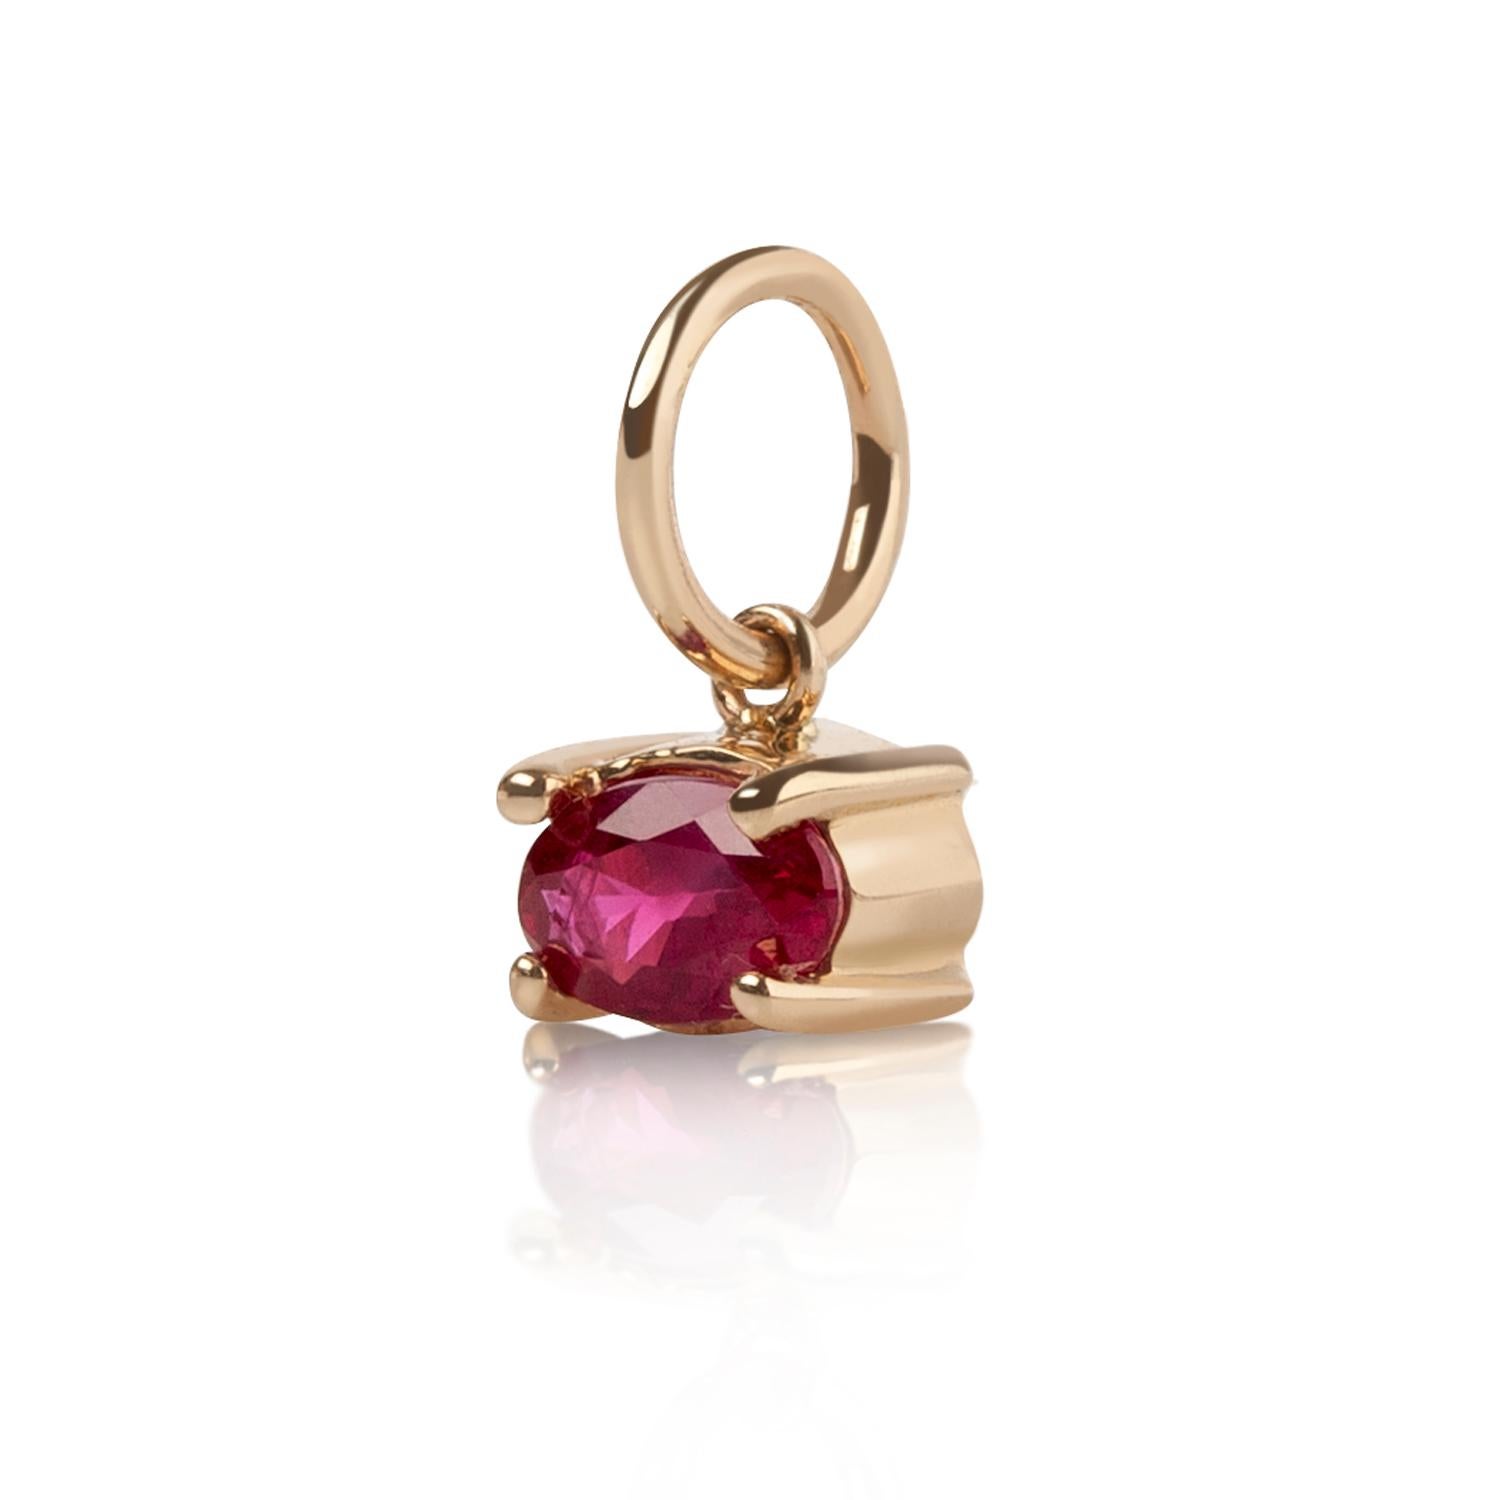 Sweet and bold oval Ruby charm, set with prongs. Add this to our Plaza charm pendant with pink sapphire and create your own personalized charm necklace!

Inspired by seeing the cross-section view of life, as if slicing a tree to see its underlying